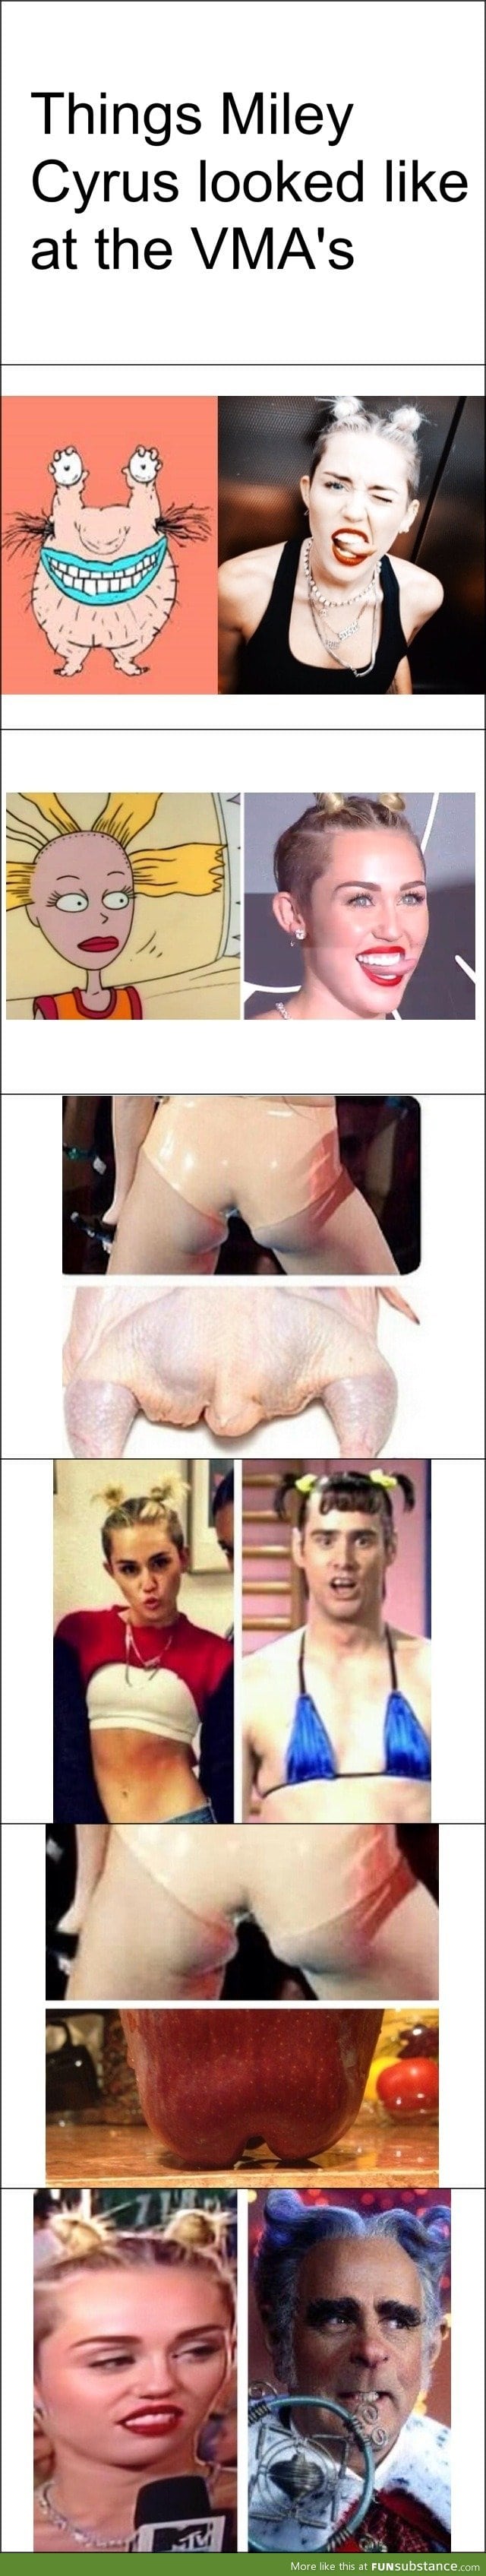 What Miley looked like at the VMA's